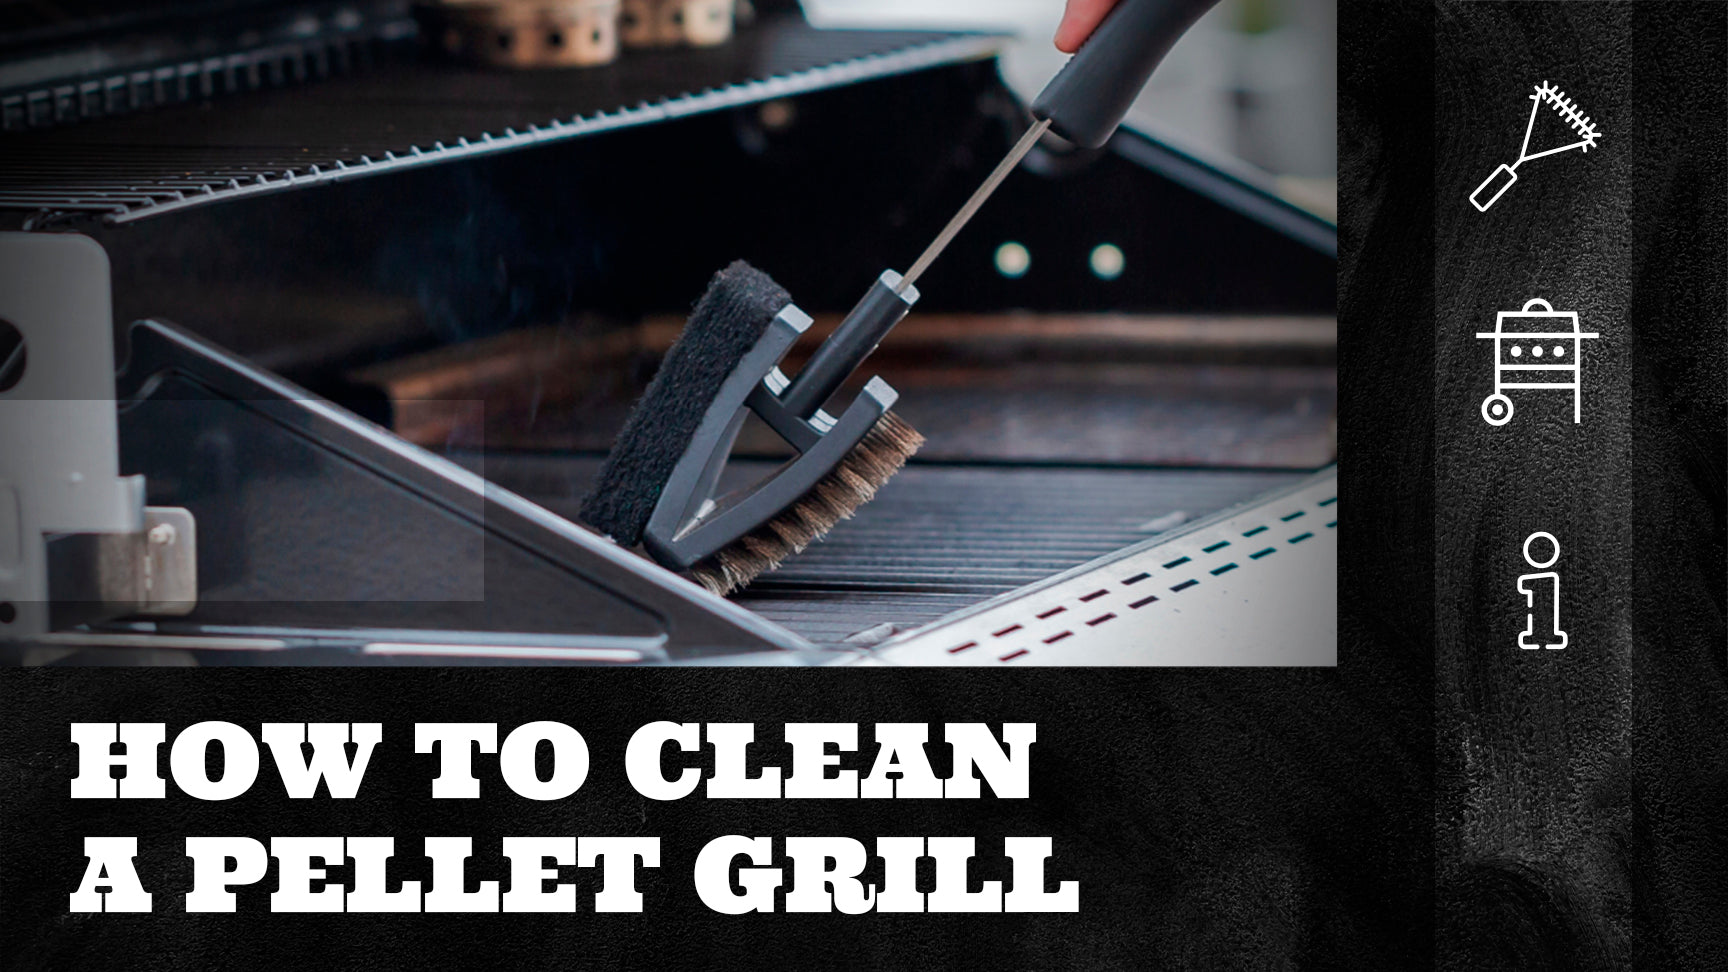 How to Clean a Traeger Grill - Regular Grill Cleaning Routine